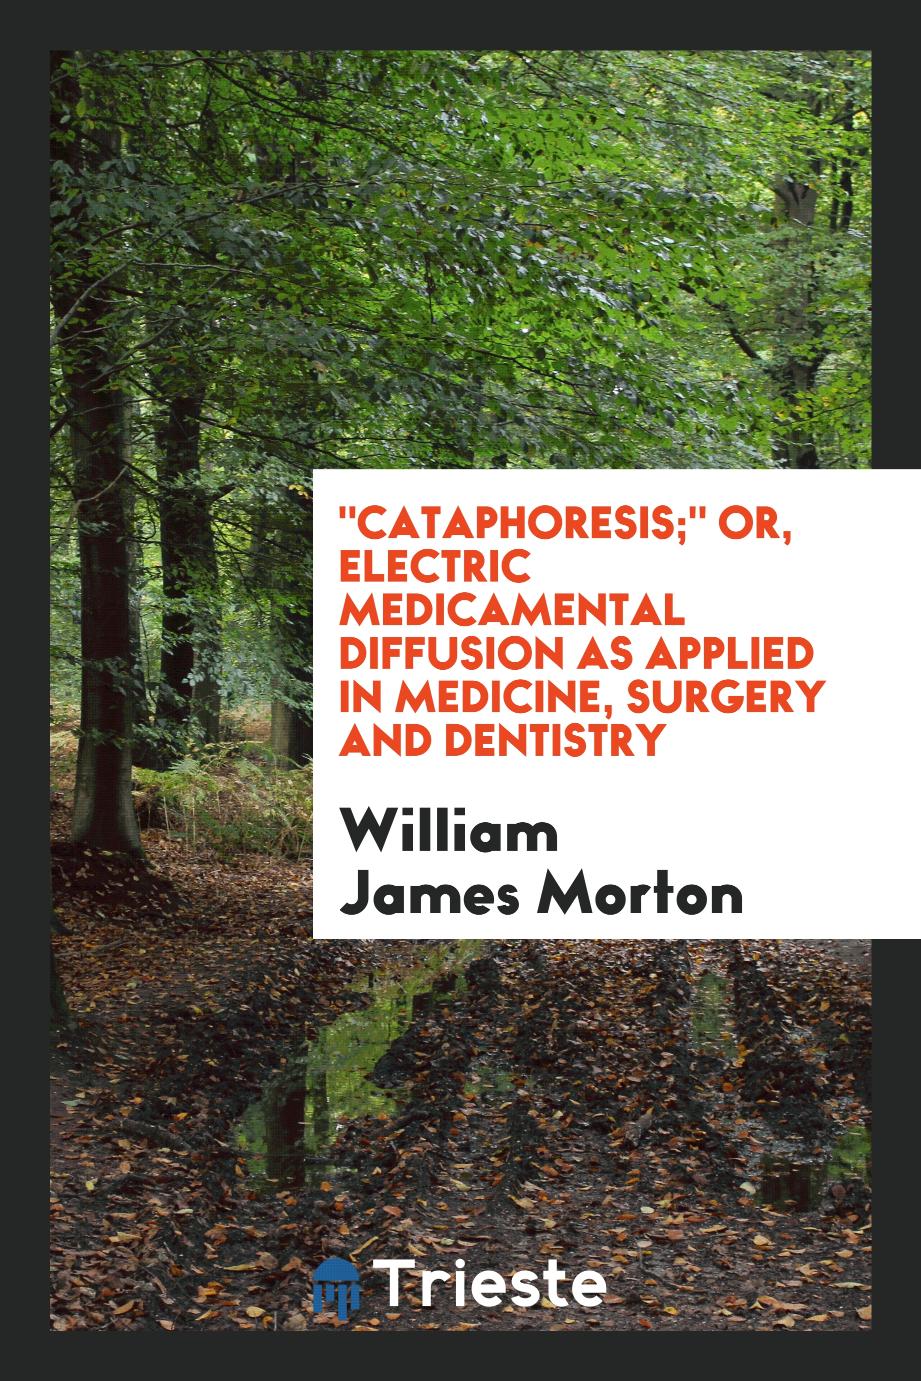 "Cataphoresis;" or, Electric Medicamental Diffusion as Applied in Medicine, Surgery and Dentistry